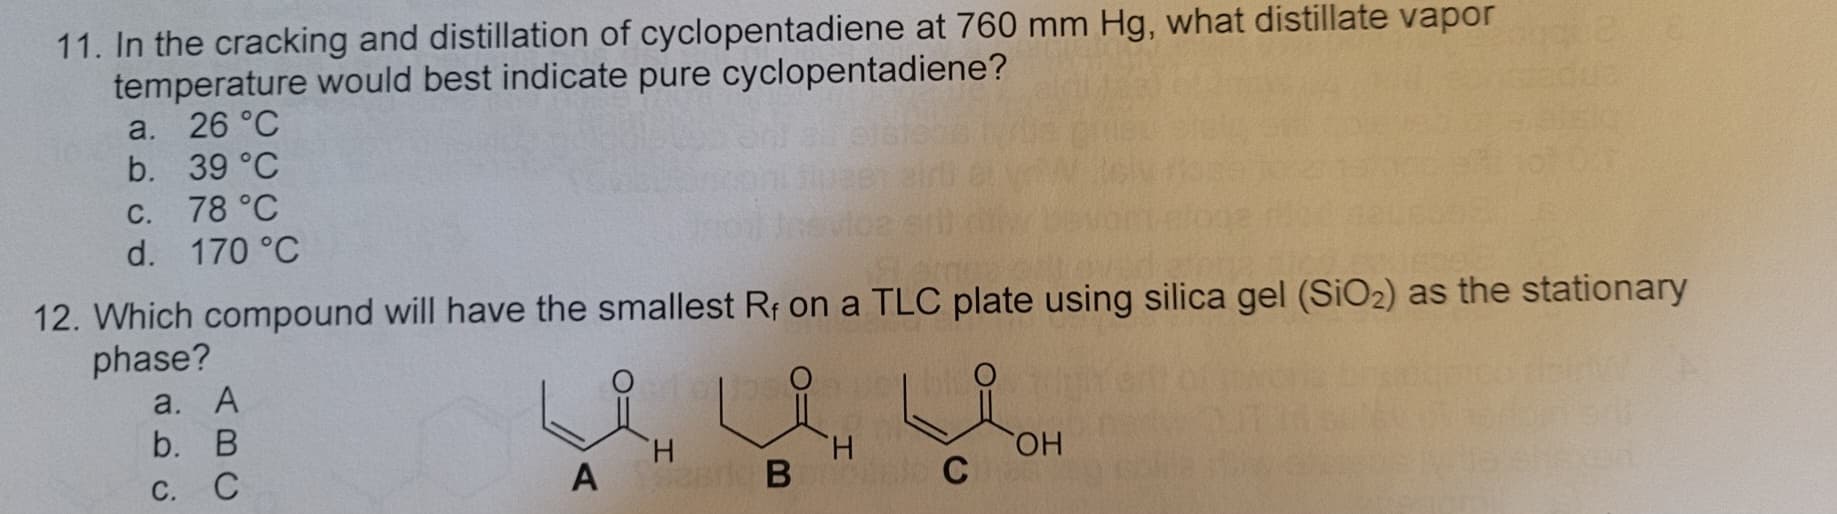 11. In the cracking and distillation of cyclopentadiene at 760 mm Hg, what distillate vapor
temperature would best indicate pure cyclopentadiene?
a. 26 °C
b. 39 °C
c. 78 °C
d. 170 °C
12. Which compound will have the smallest Rf on a TLC plate using silica gel (SiO2) as the stationary
phase?
a. A
b. B
C. C
H
A Serie B
H
C
OH